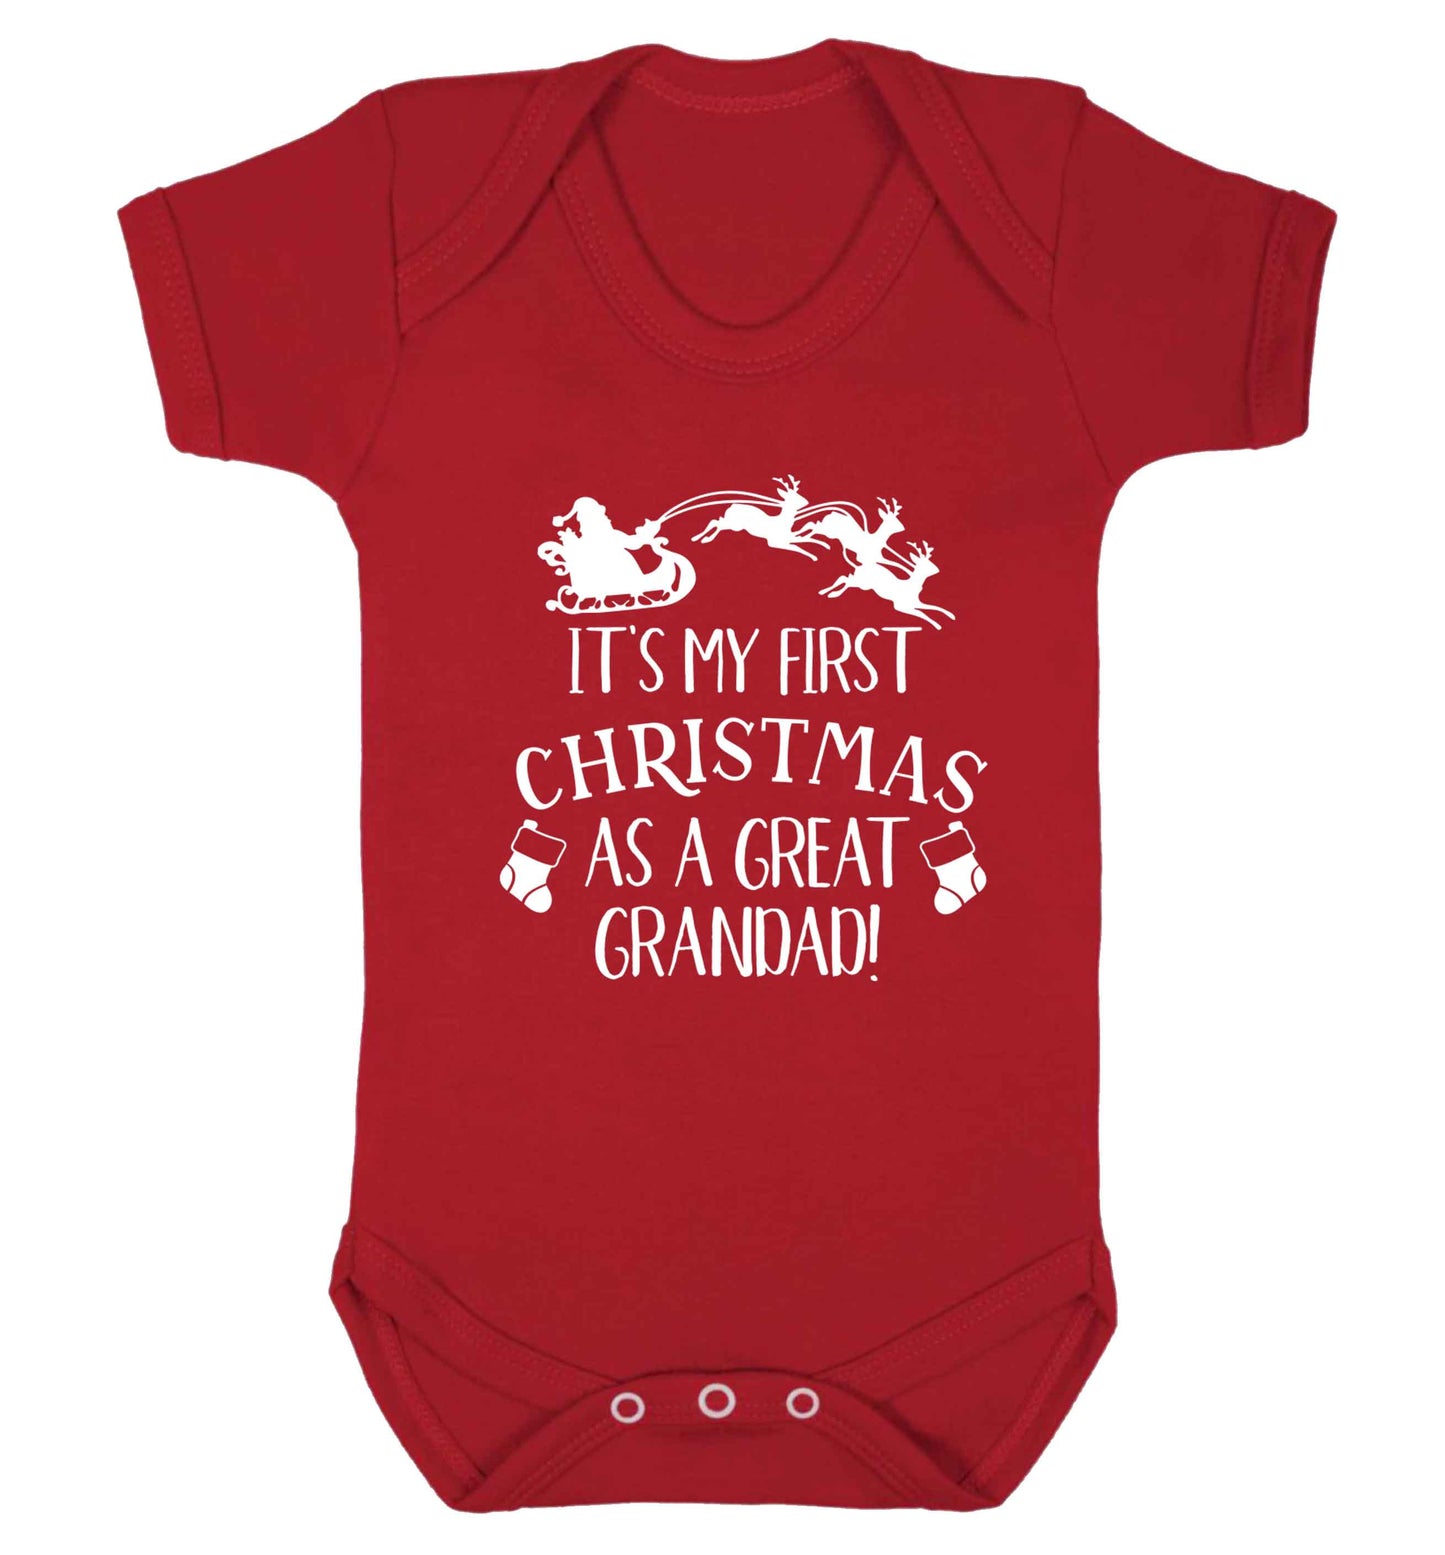 It's my first Christmas as a great grandad! Baby Vest red 18-24 months